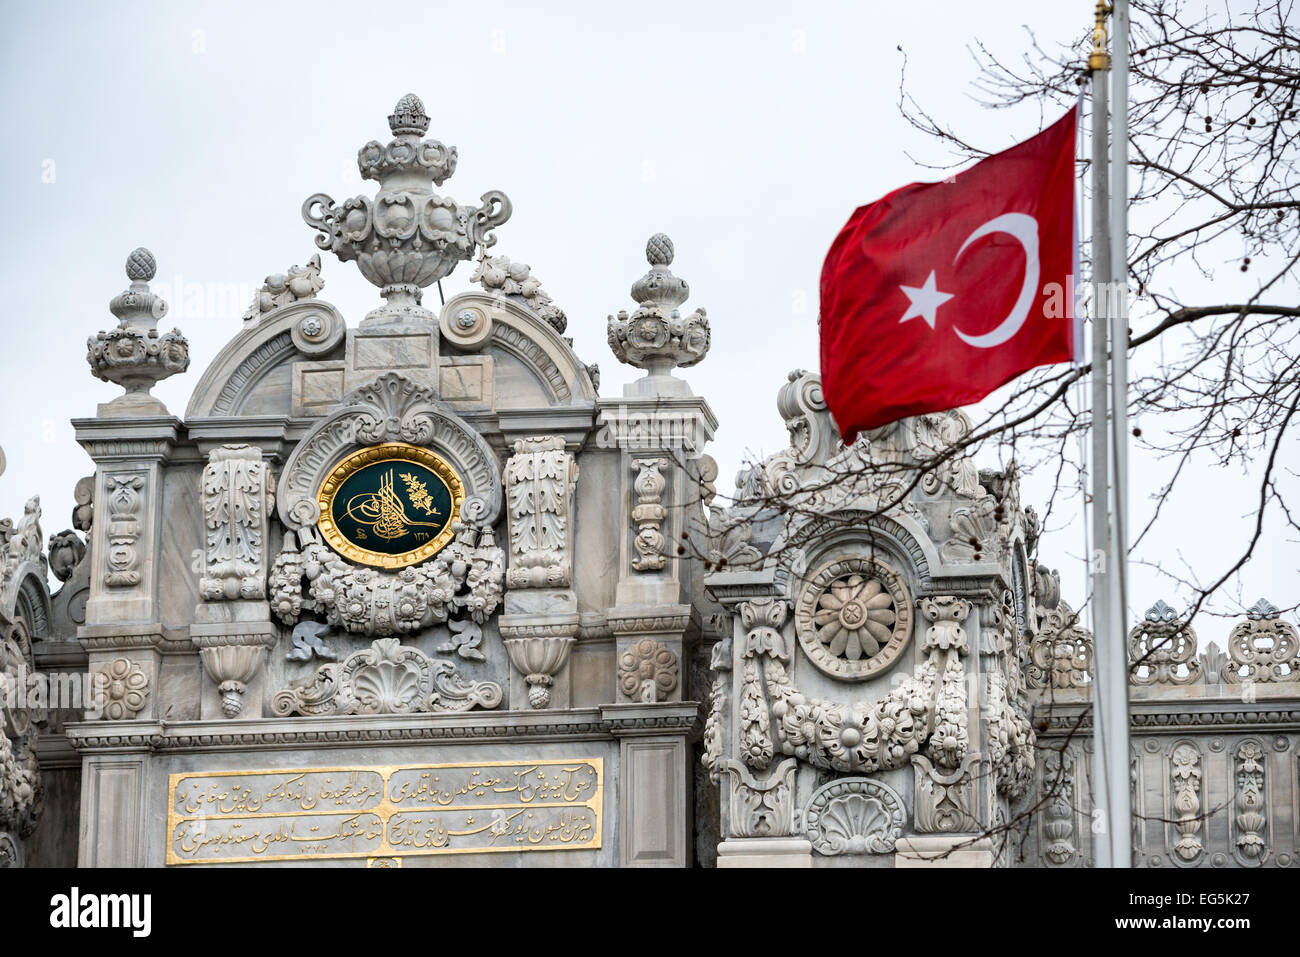 ISTANBUL, Turkey (Turkiye) — A Turkish flag flies in front of the main gate at Dolmabahçe Palace. Dolmabahçe Palace, on the banks of the Bosphorus Strait, was the administrative center of the Ottoman Empire from 1856 to 1887 and 1909 to 1922. Built and decorated in the Ottoman Baroque style, it stretches along a section of the European coast of the Bosphorus Strait in central Istanbul. Stock Photo